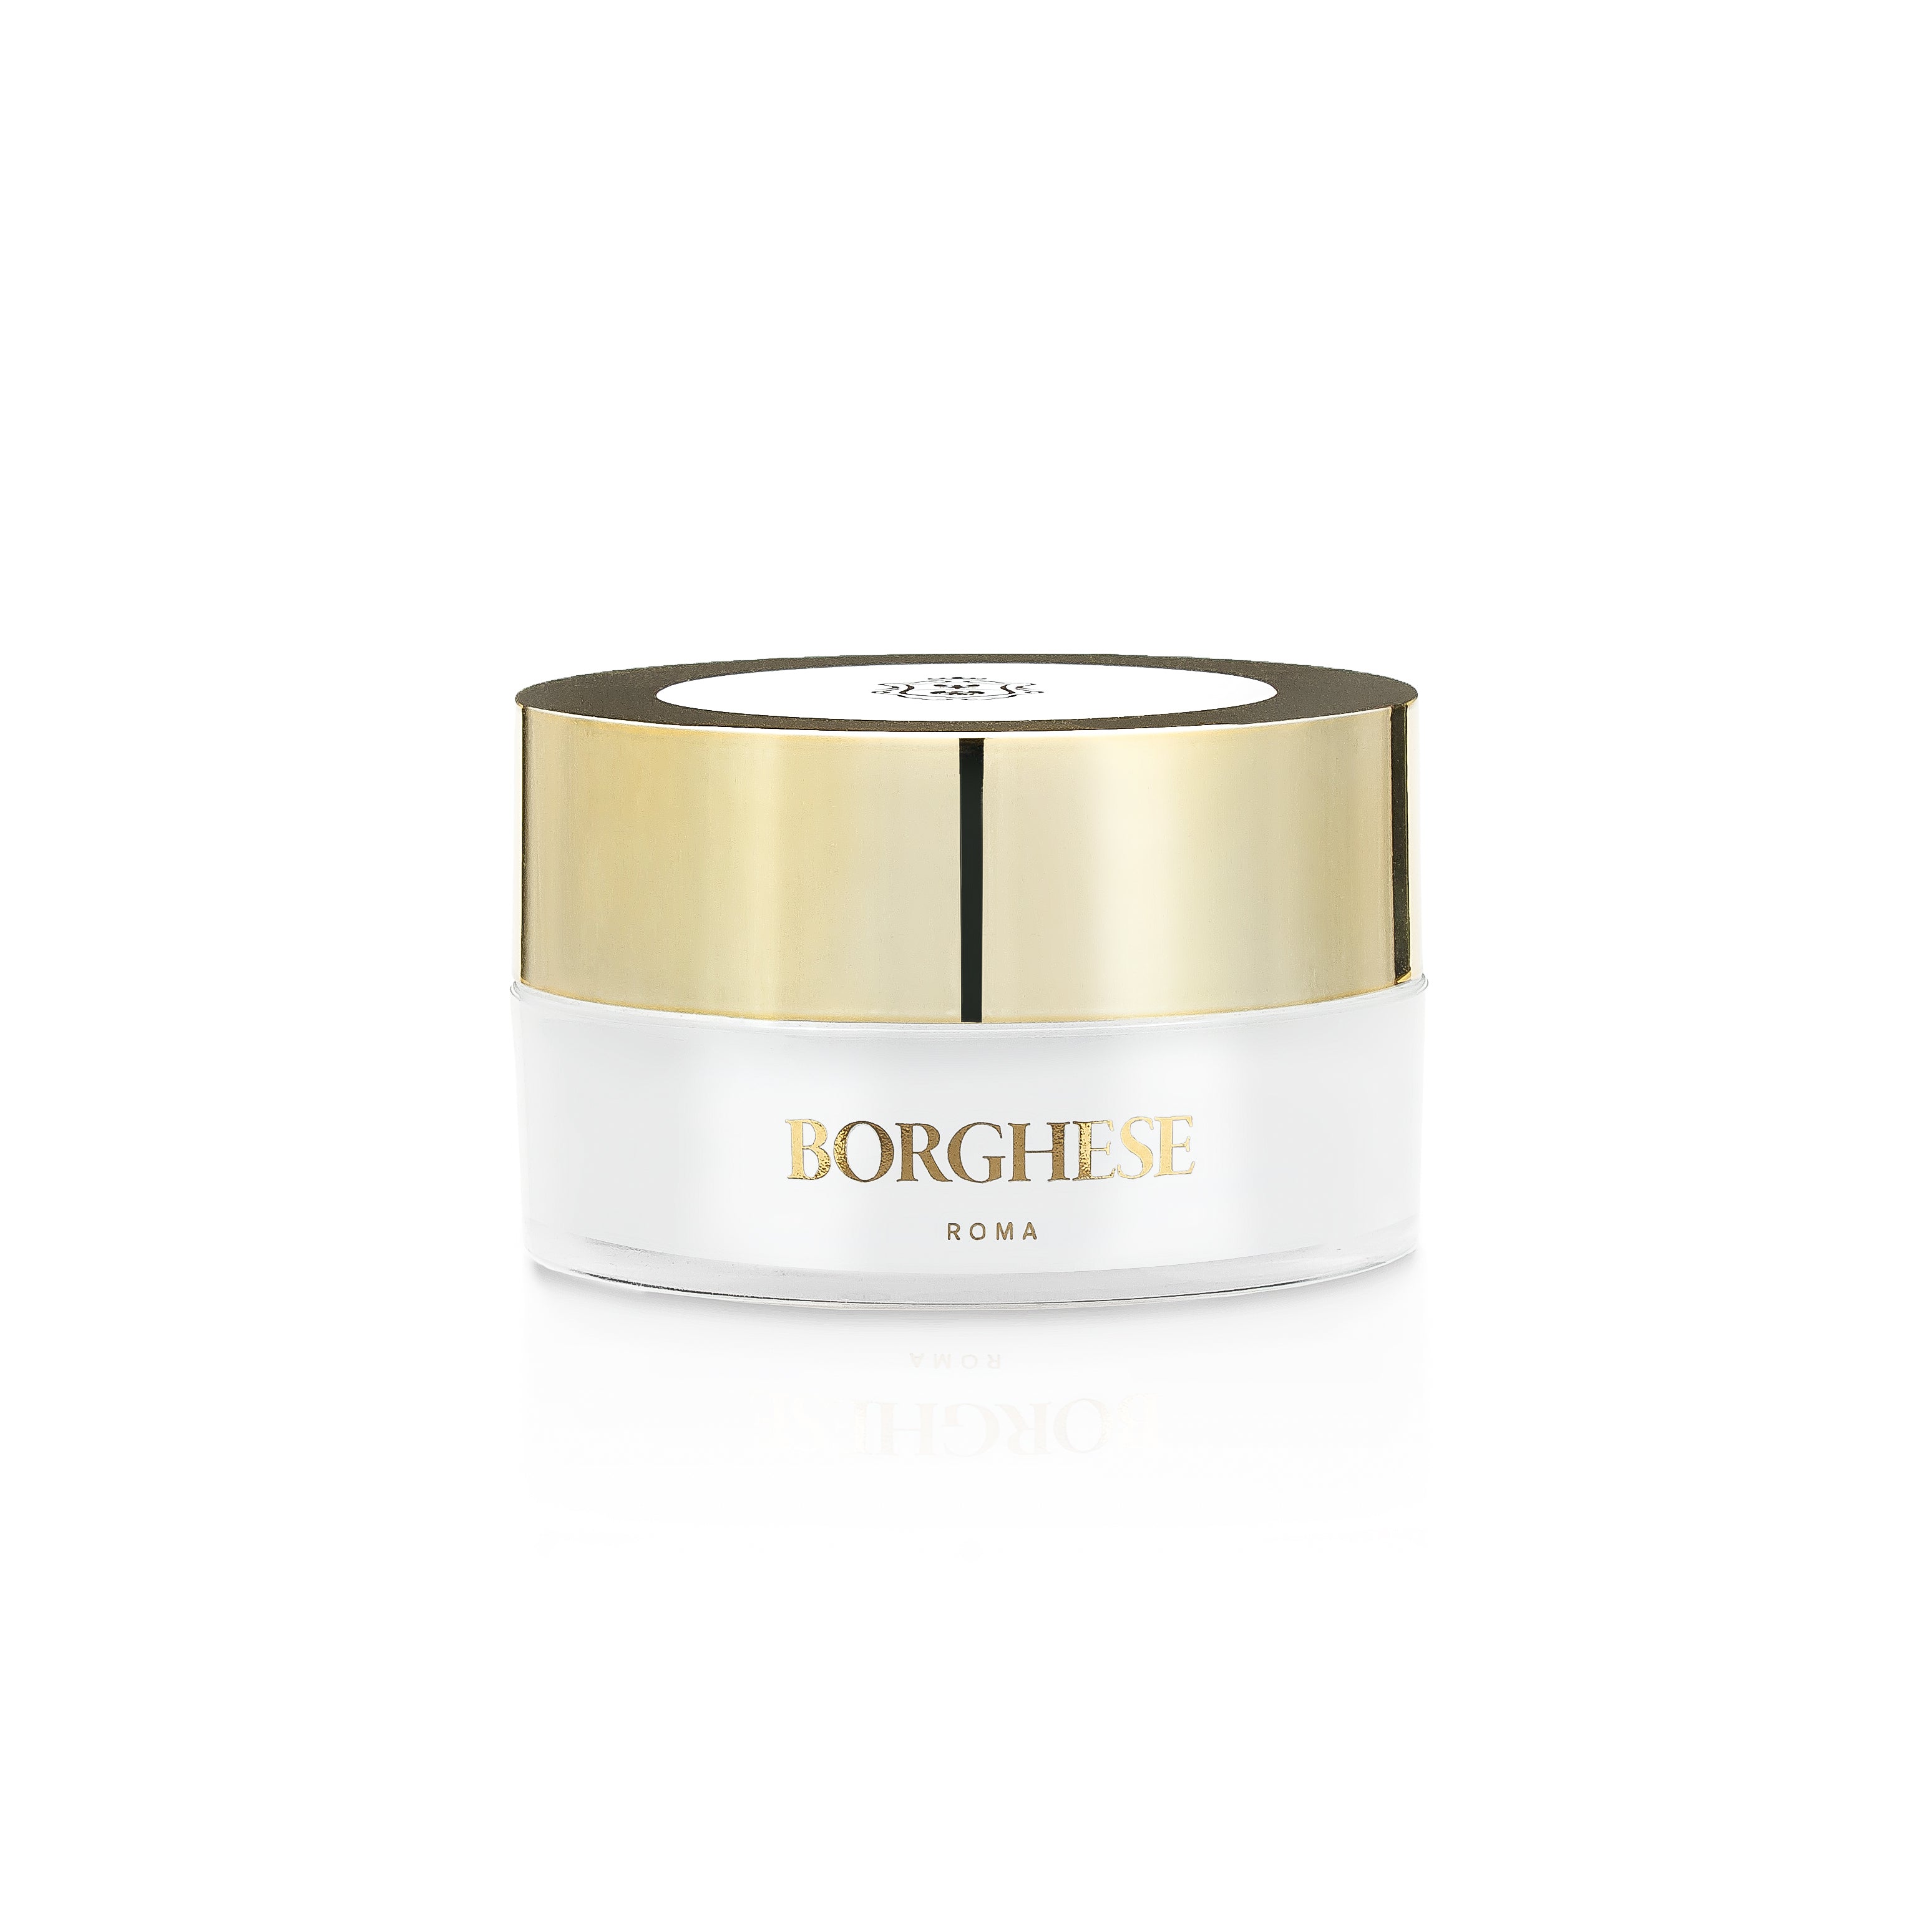 This is a picture of the Borghese Mini Radiante Renew & Restore Night Creme Deluxe Sample